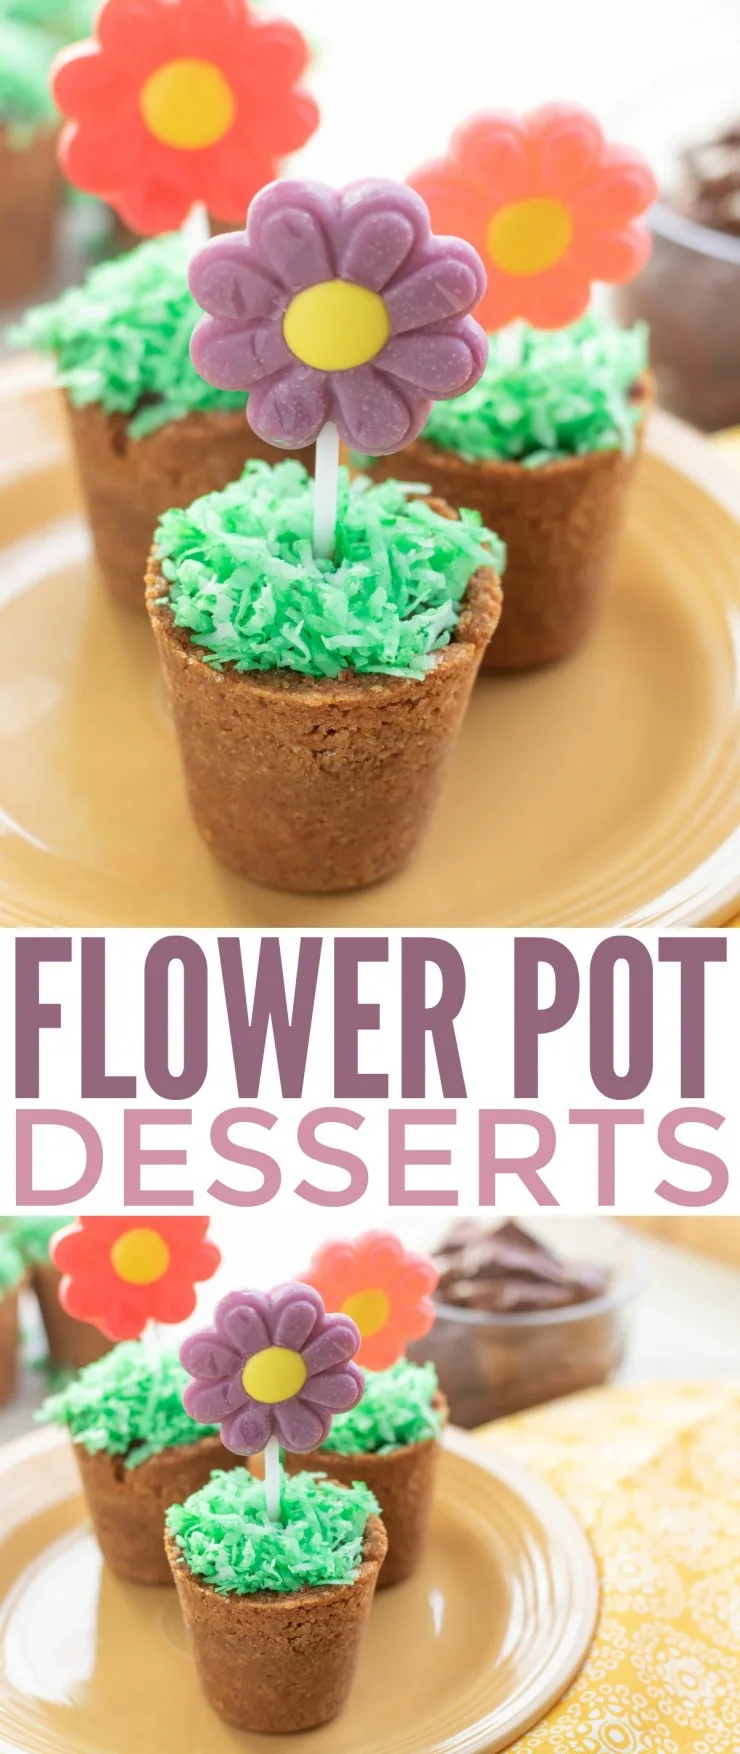  These Spring Flower Pot Desserts are a darling dessert for spring! Kids will love making, and eating them with mom, they are a fun Easter party treat for kids too.